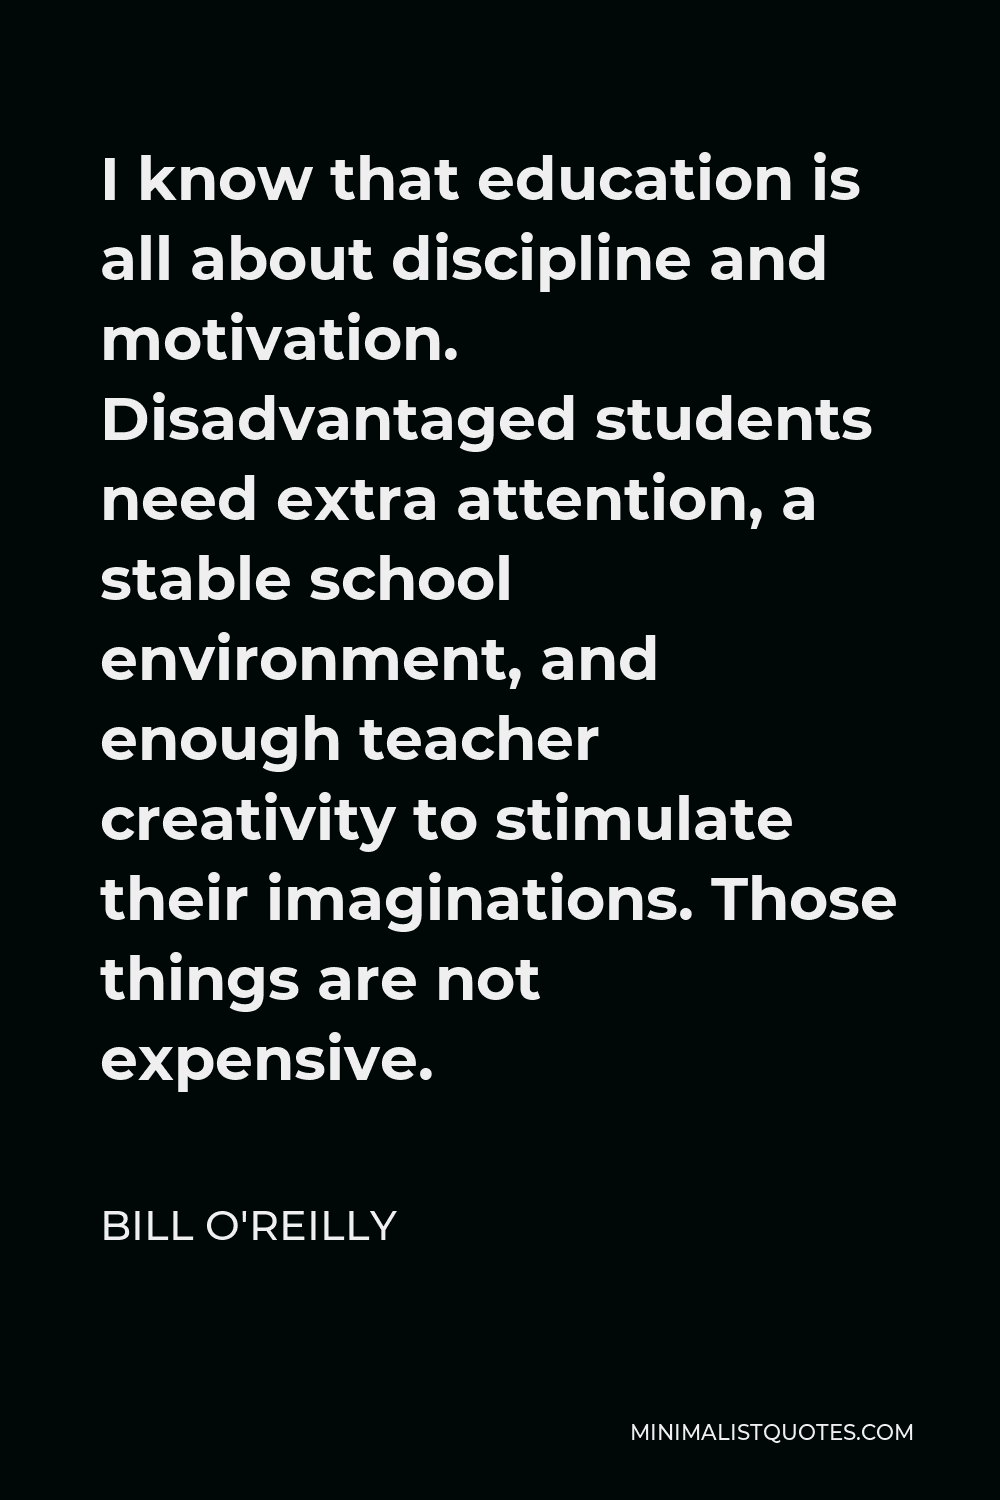 Bill O'Reilly Quote - I know that education is all about discipline and motivation. Disadvantaged students need extra attention, a stable school environment, and enough teacher creativity to stimulate their imaginations. Those things are not expensive.